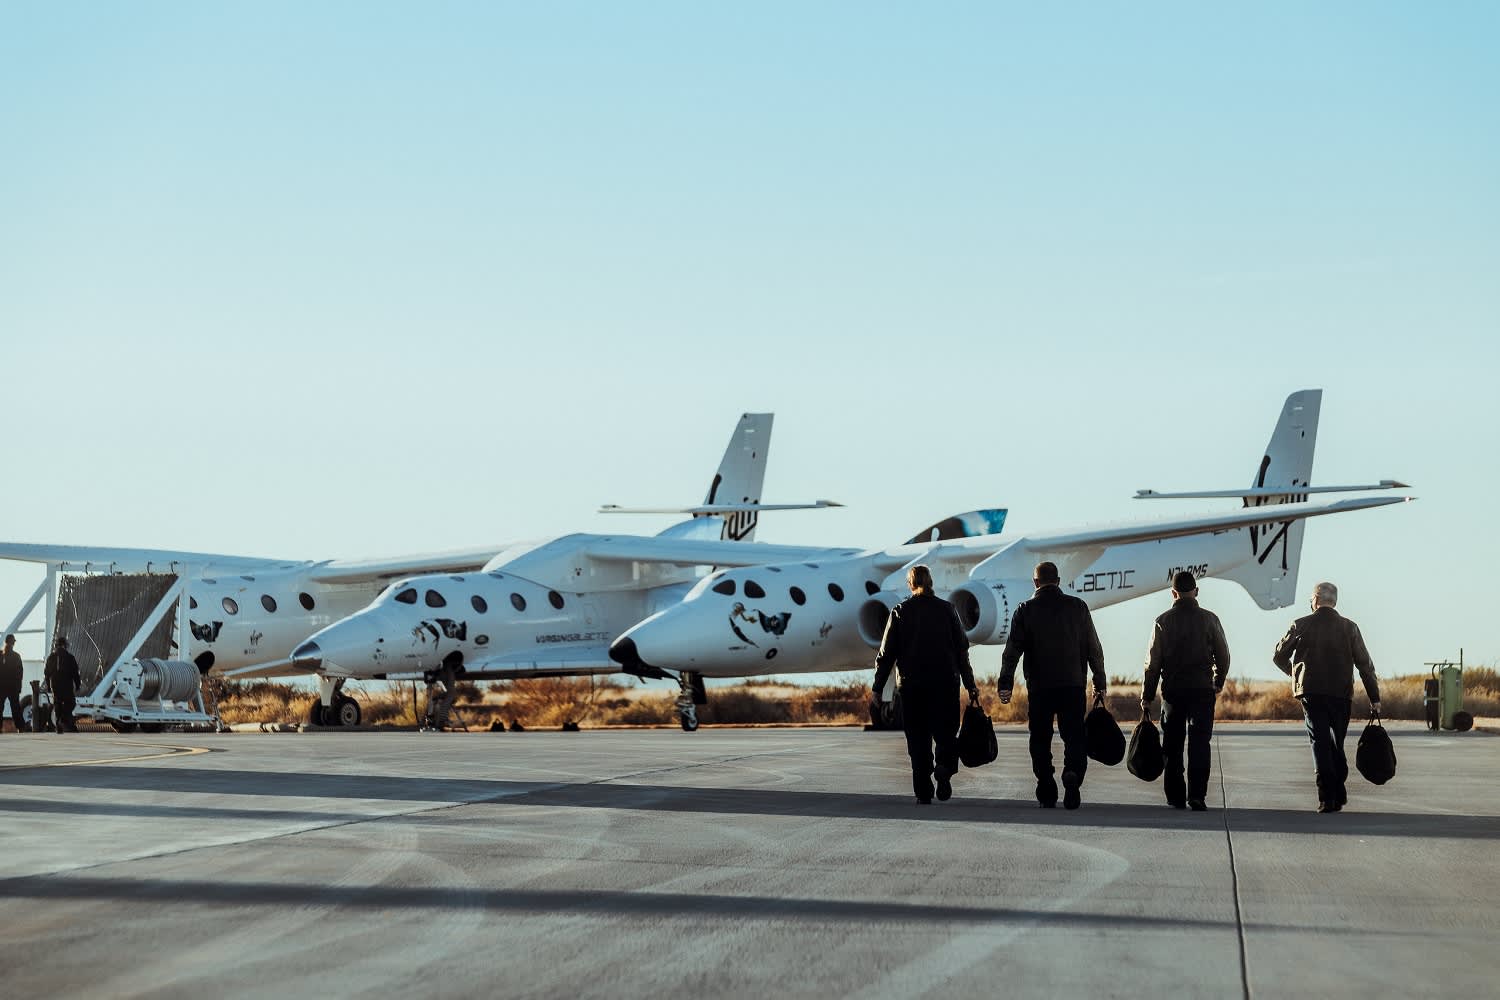 Virgin Galactic stock SPCE plunges after delays to spaceflights